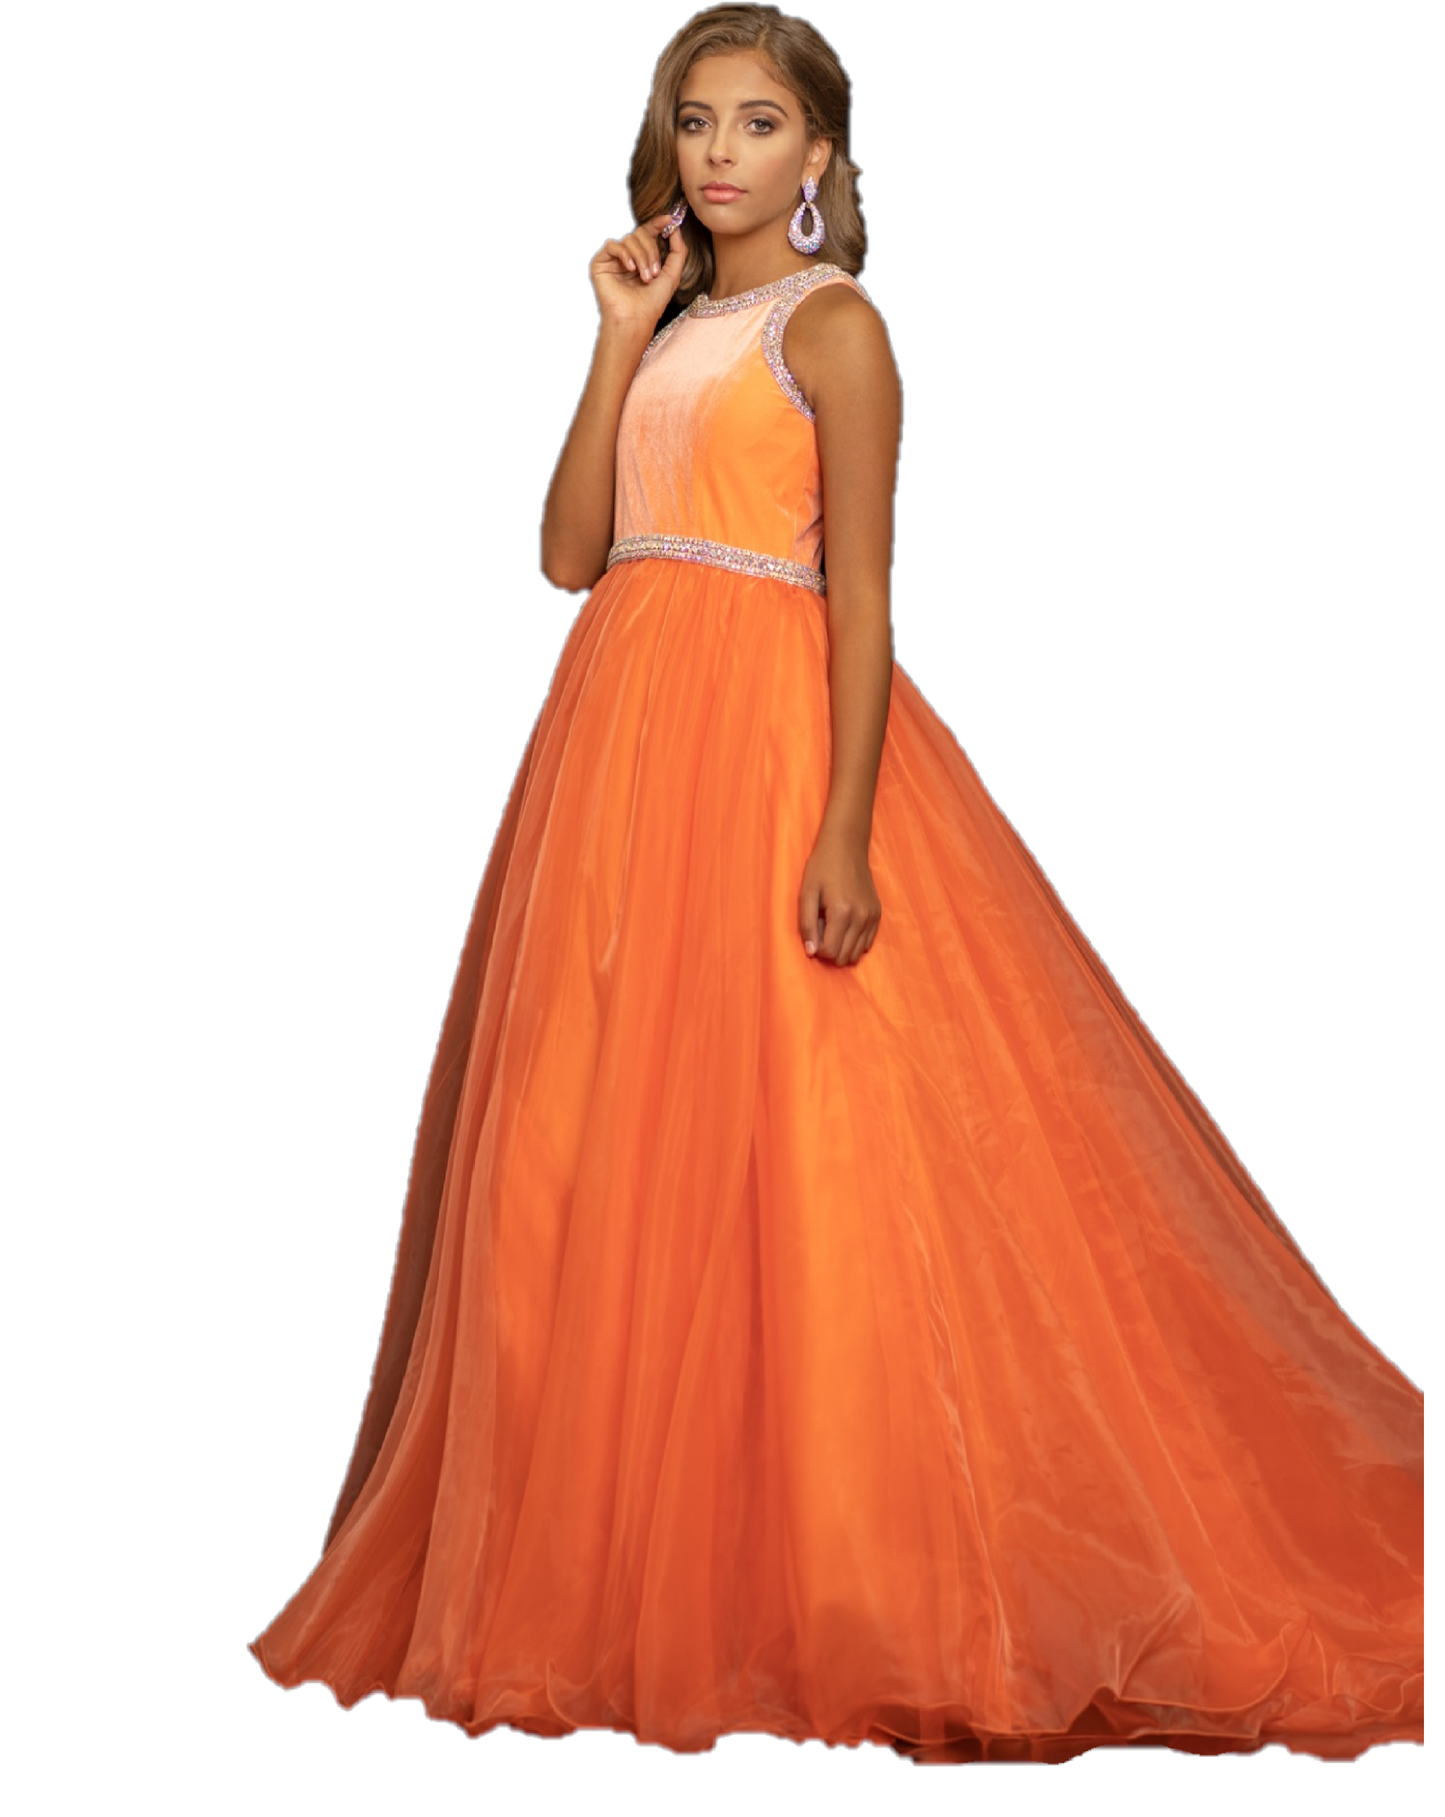 Sugar Kayne C124 by Johnathan Kayne is a stretch satin bodice girl pageant dress. Lush Organza Ballgown skirt. Crystal Embellished waist band and bodice edges. High Neck Gown with sweeping train.  Available Colors: Creamsicle, Royal  Available Size: 2-16